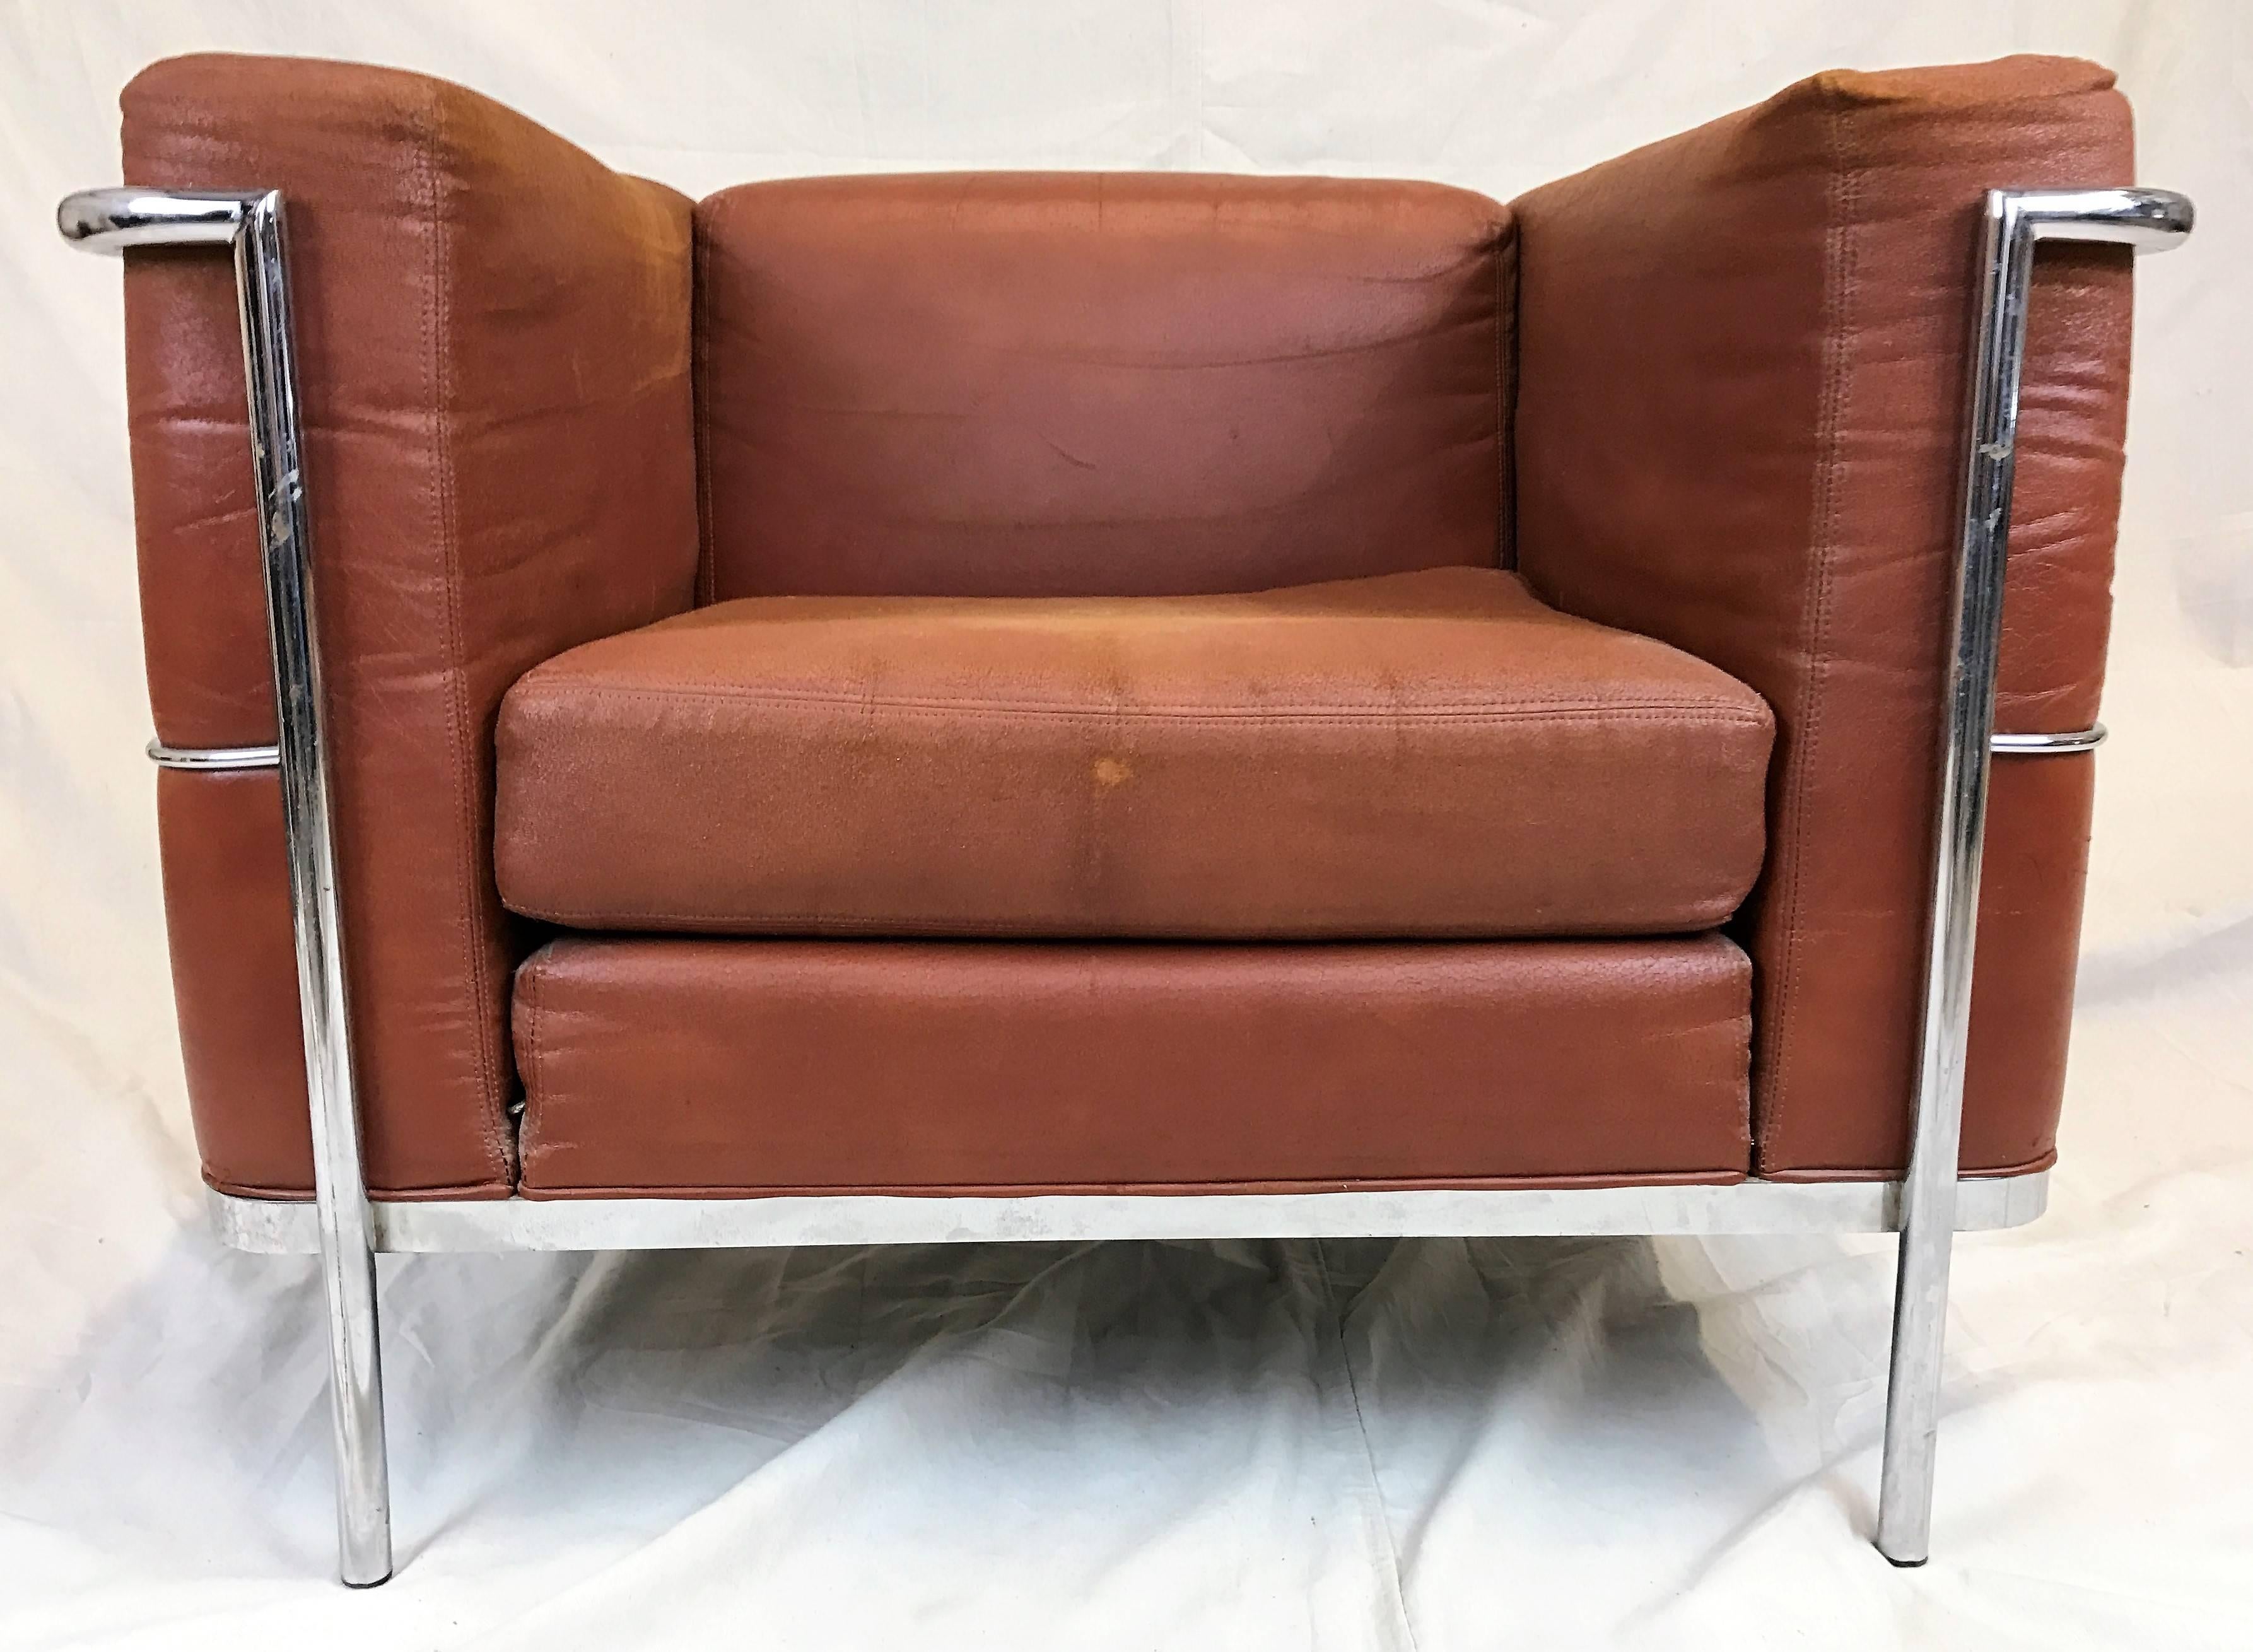 Pair of Mid-Century Modern lounge chairs in an upholstered rust-colored faux leather by Jack Cartwright, circa 1970s, in the manner of the LC2 by Le Corbusier. The original fabric shows some age appropriate wear, some rips in fabric.